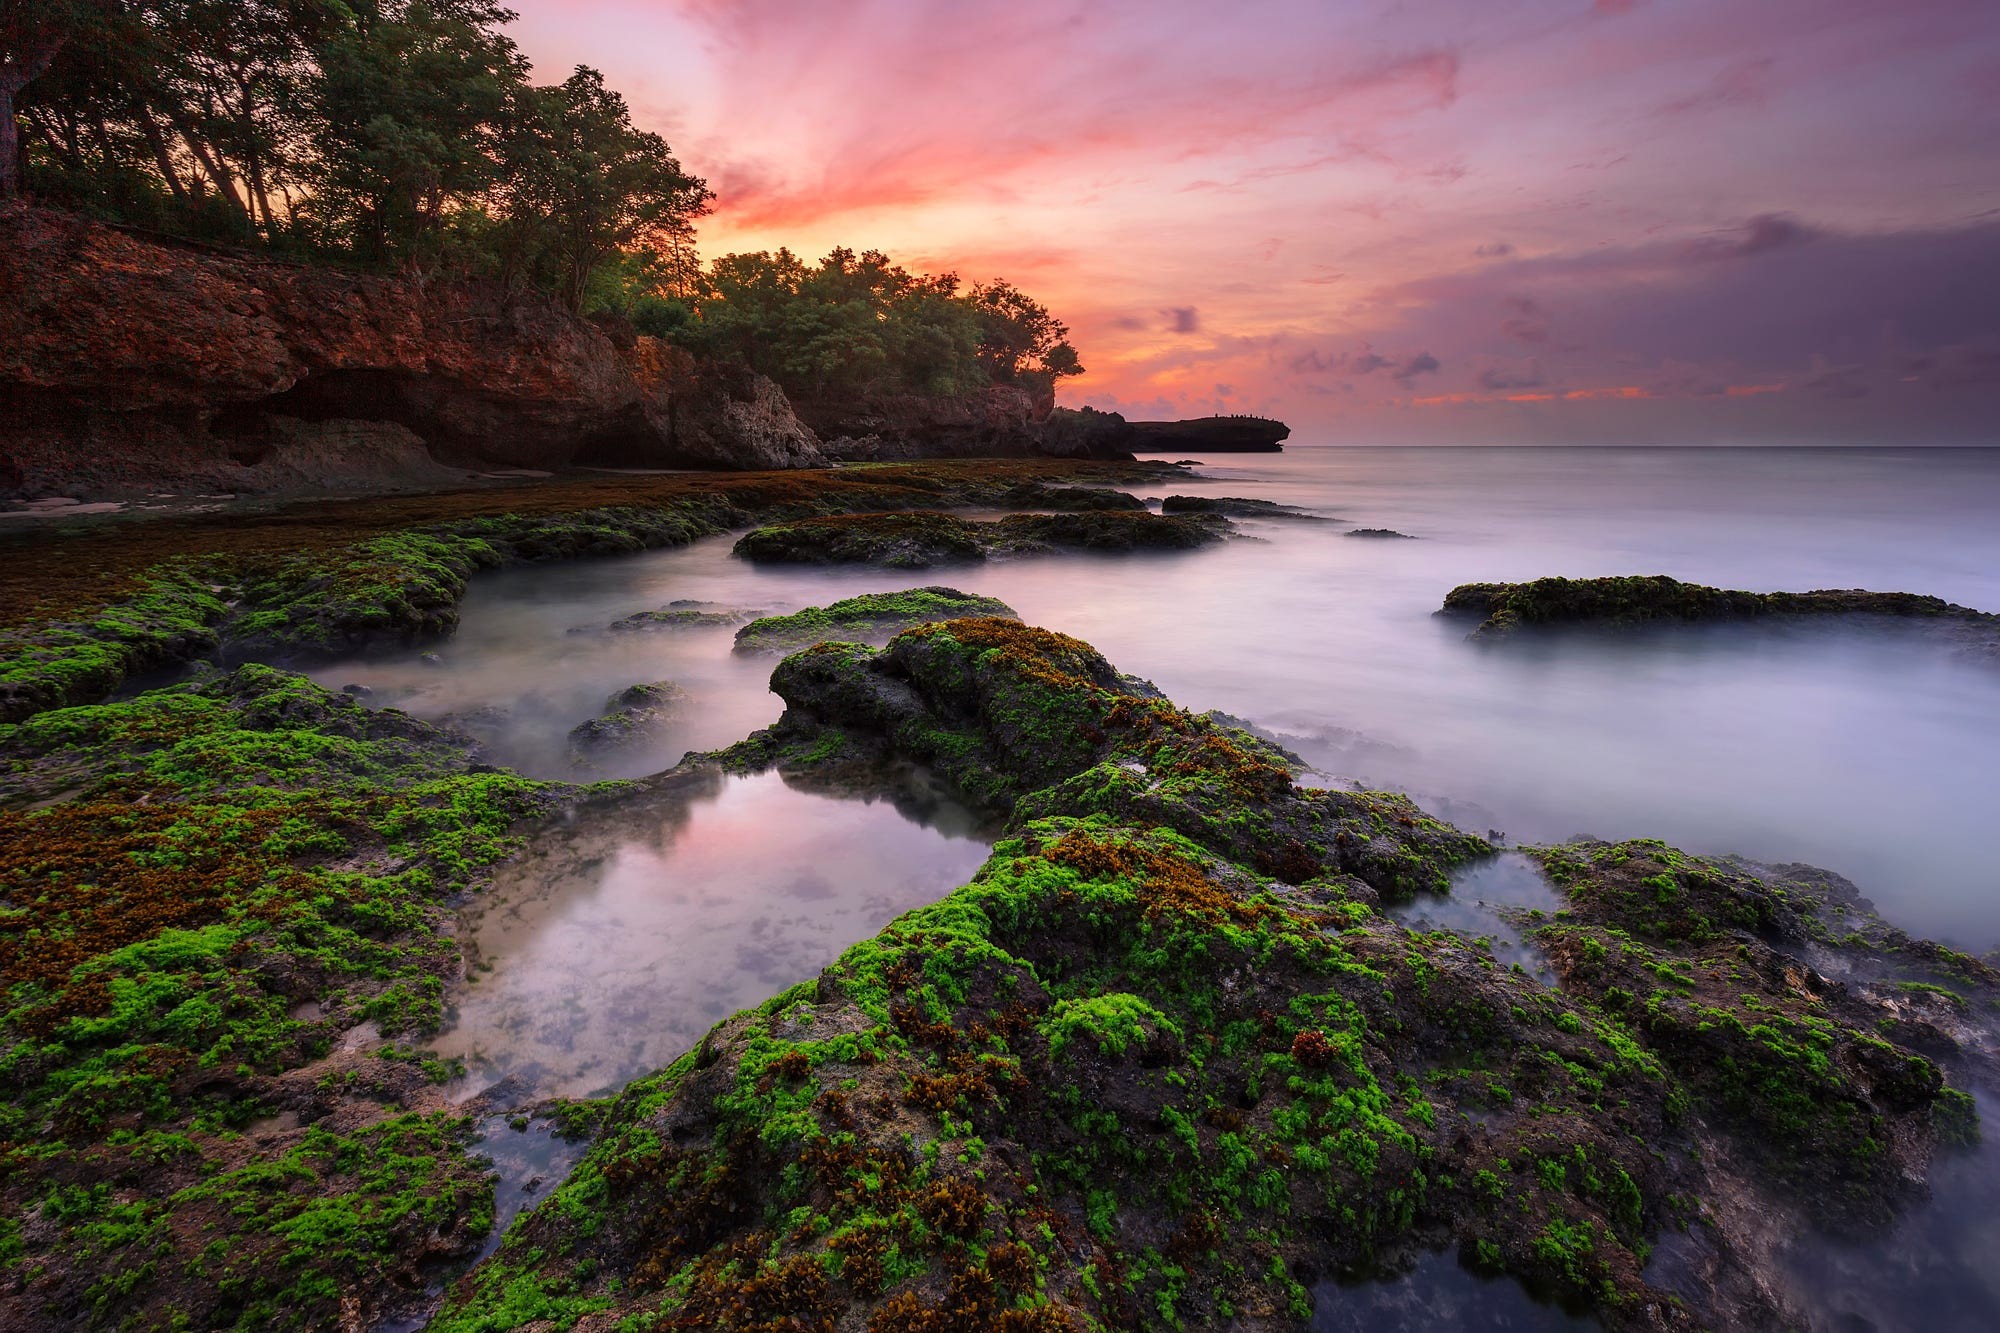 General 2000x1333 nature landscape long exposure trees water moss clouds sunset